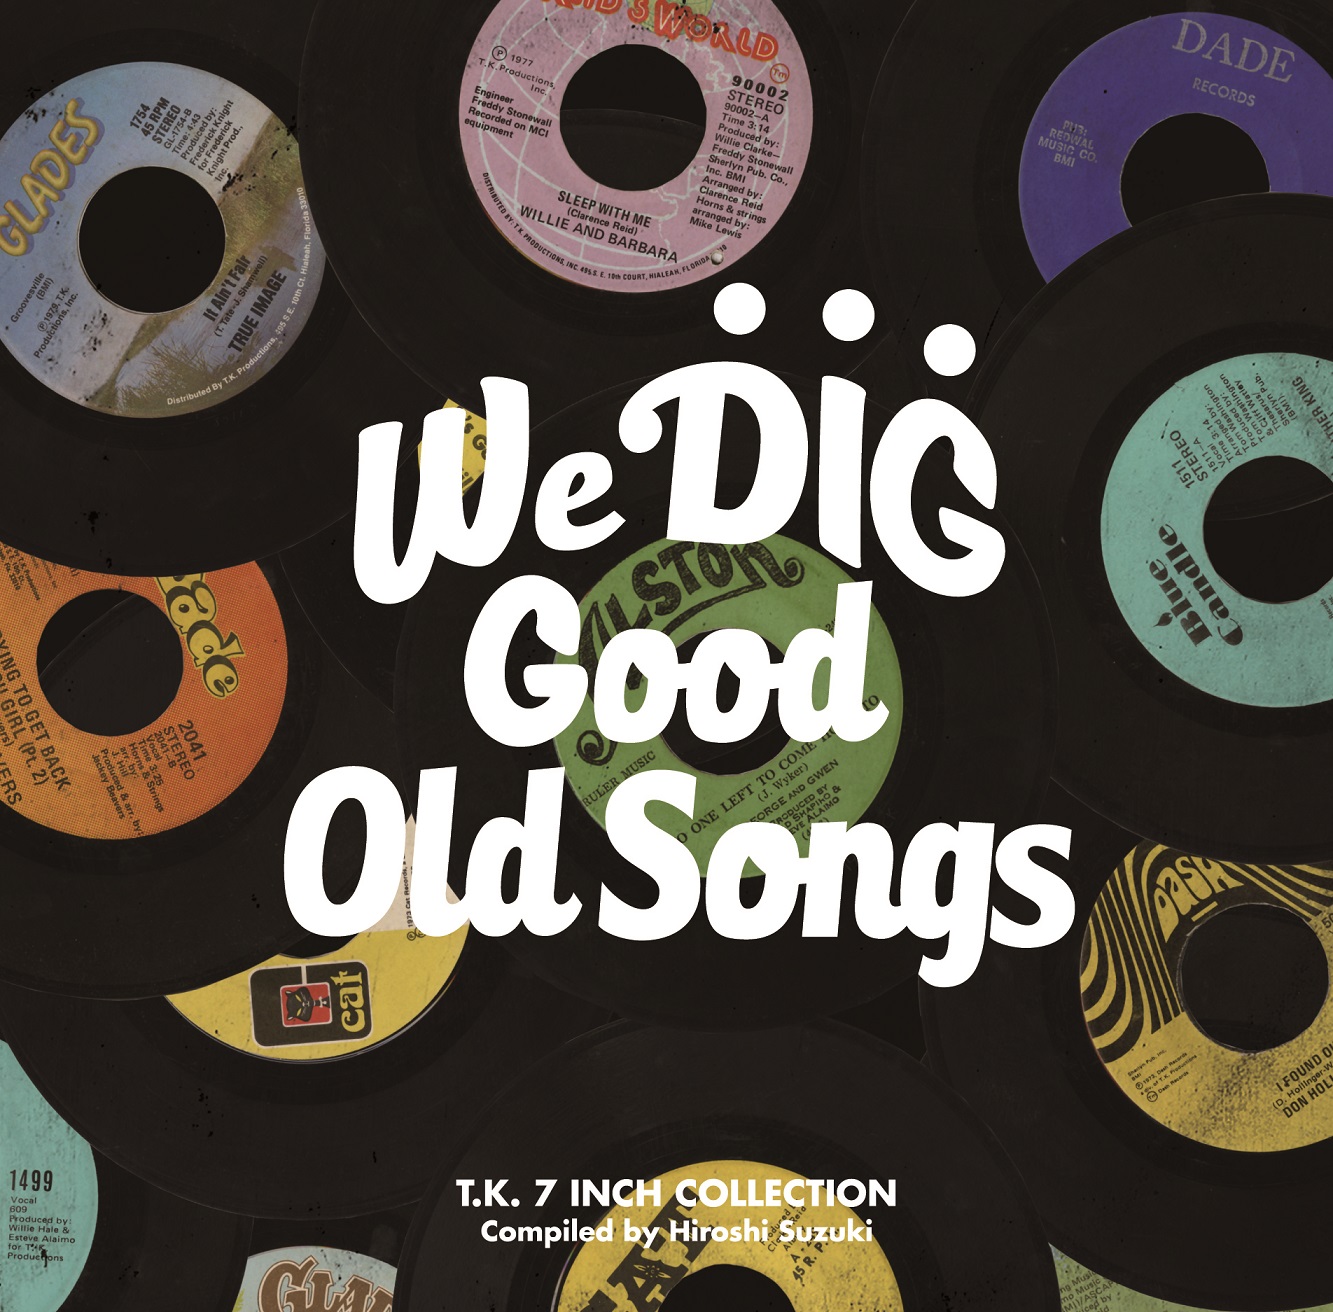 WE DIG !/GOOD OLD SONGS -T.K. 7INCH COLLECTION-